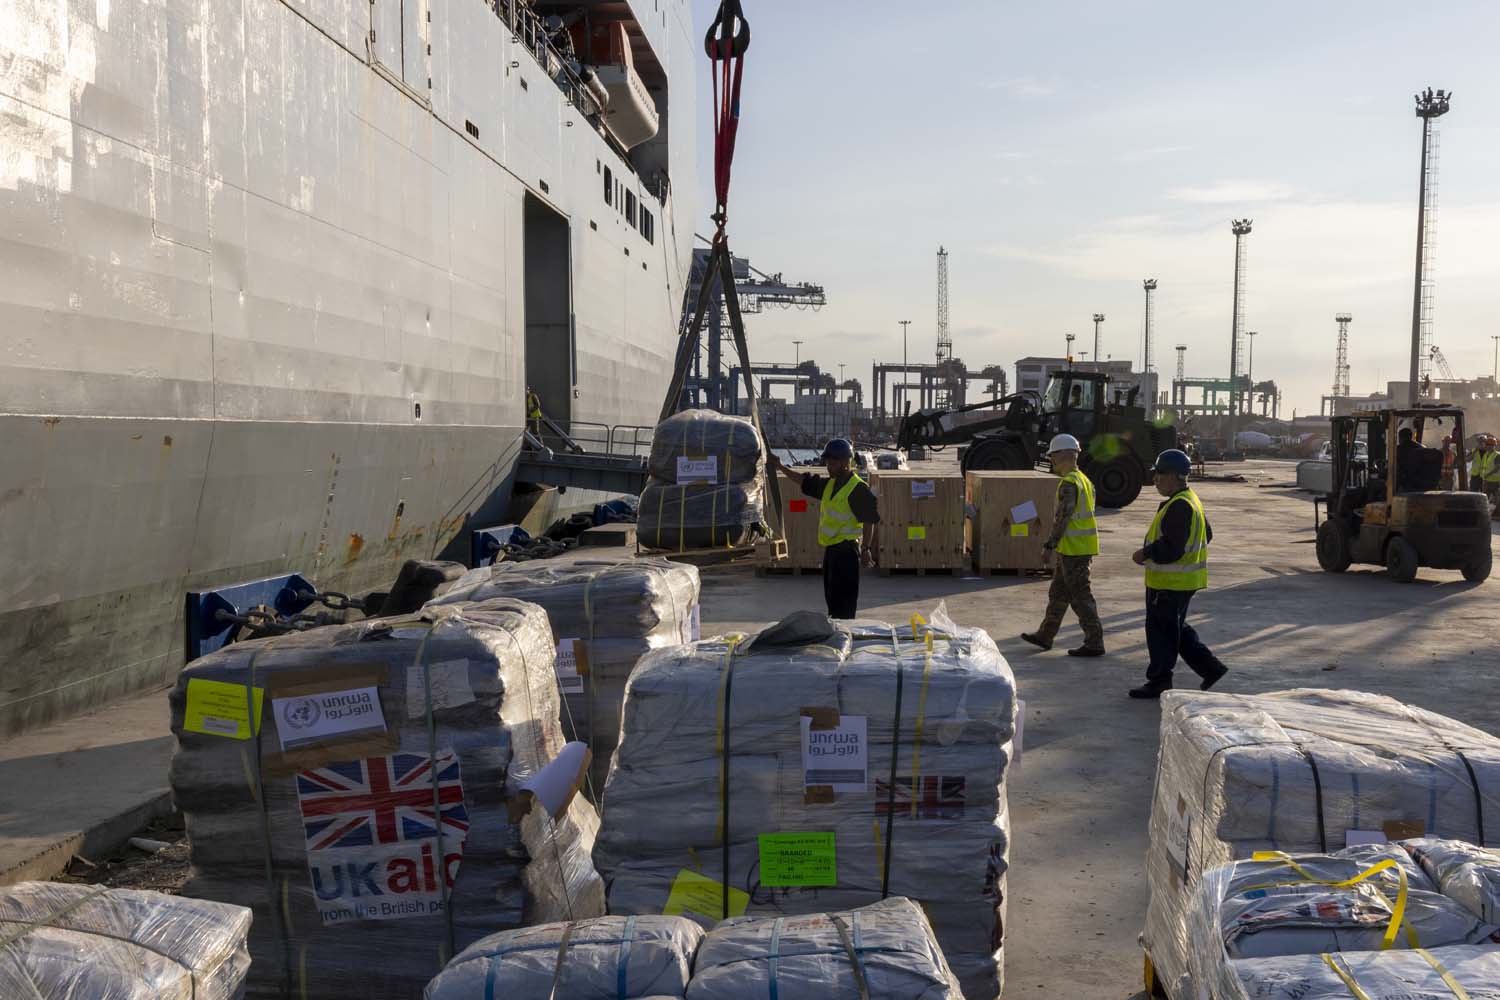 RFA Lyme Bay has delivered over 80 tonnes of humanitarian aid for Gaza into Port Said, Egypt. The aid was handed to the Egyptian Red Crescent Society for transfer to Rafah and distribution in Gaza by the United Nations Relief and Works Agency (UNRWA).The ship, operated by the Royal Fleet Auxiliary - the Royal Navy’s vital support flotilla - delivered over 300 pallets, containing over 10,000 thermal blankets and nearly 5,000 shelter packs, of UK Aid on behalf of the Foreign, Commonwealth and Development Office, as well as 11 pallets of medical aid on behalf of the Republic of Cyprus. RFA Lyme Bay is deployed to the Eastern Mediterranean, alongside RFA Argus, as part of Littoral Response Group (South).